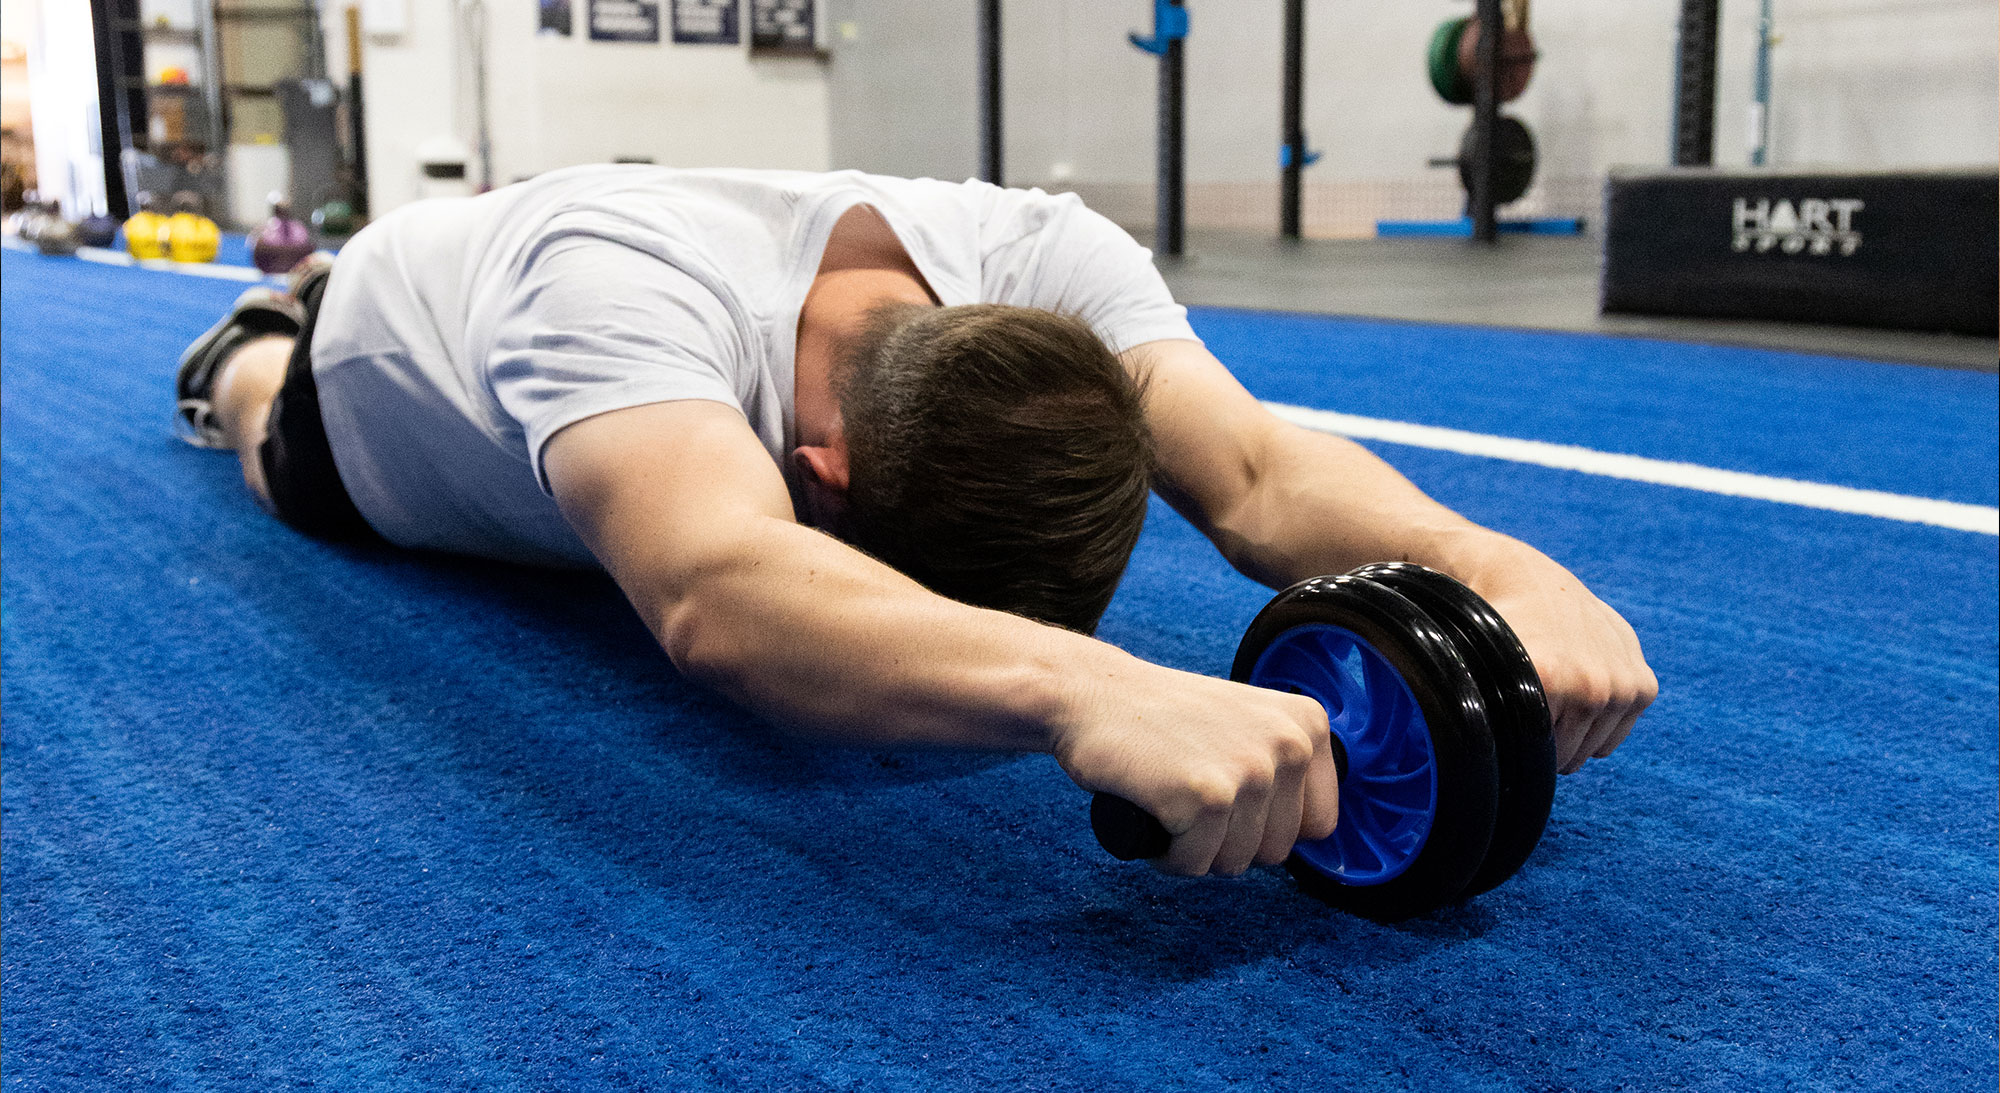 7 Benefits of Training with an Ab Roller | AlphaFit Blog